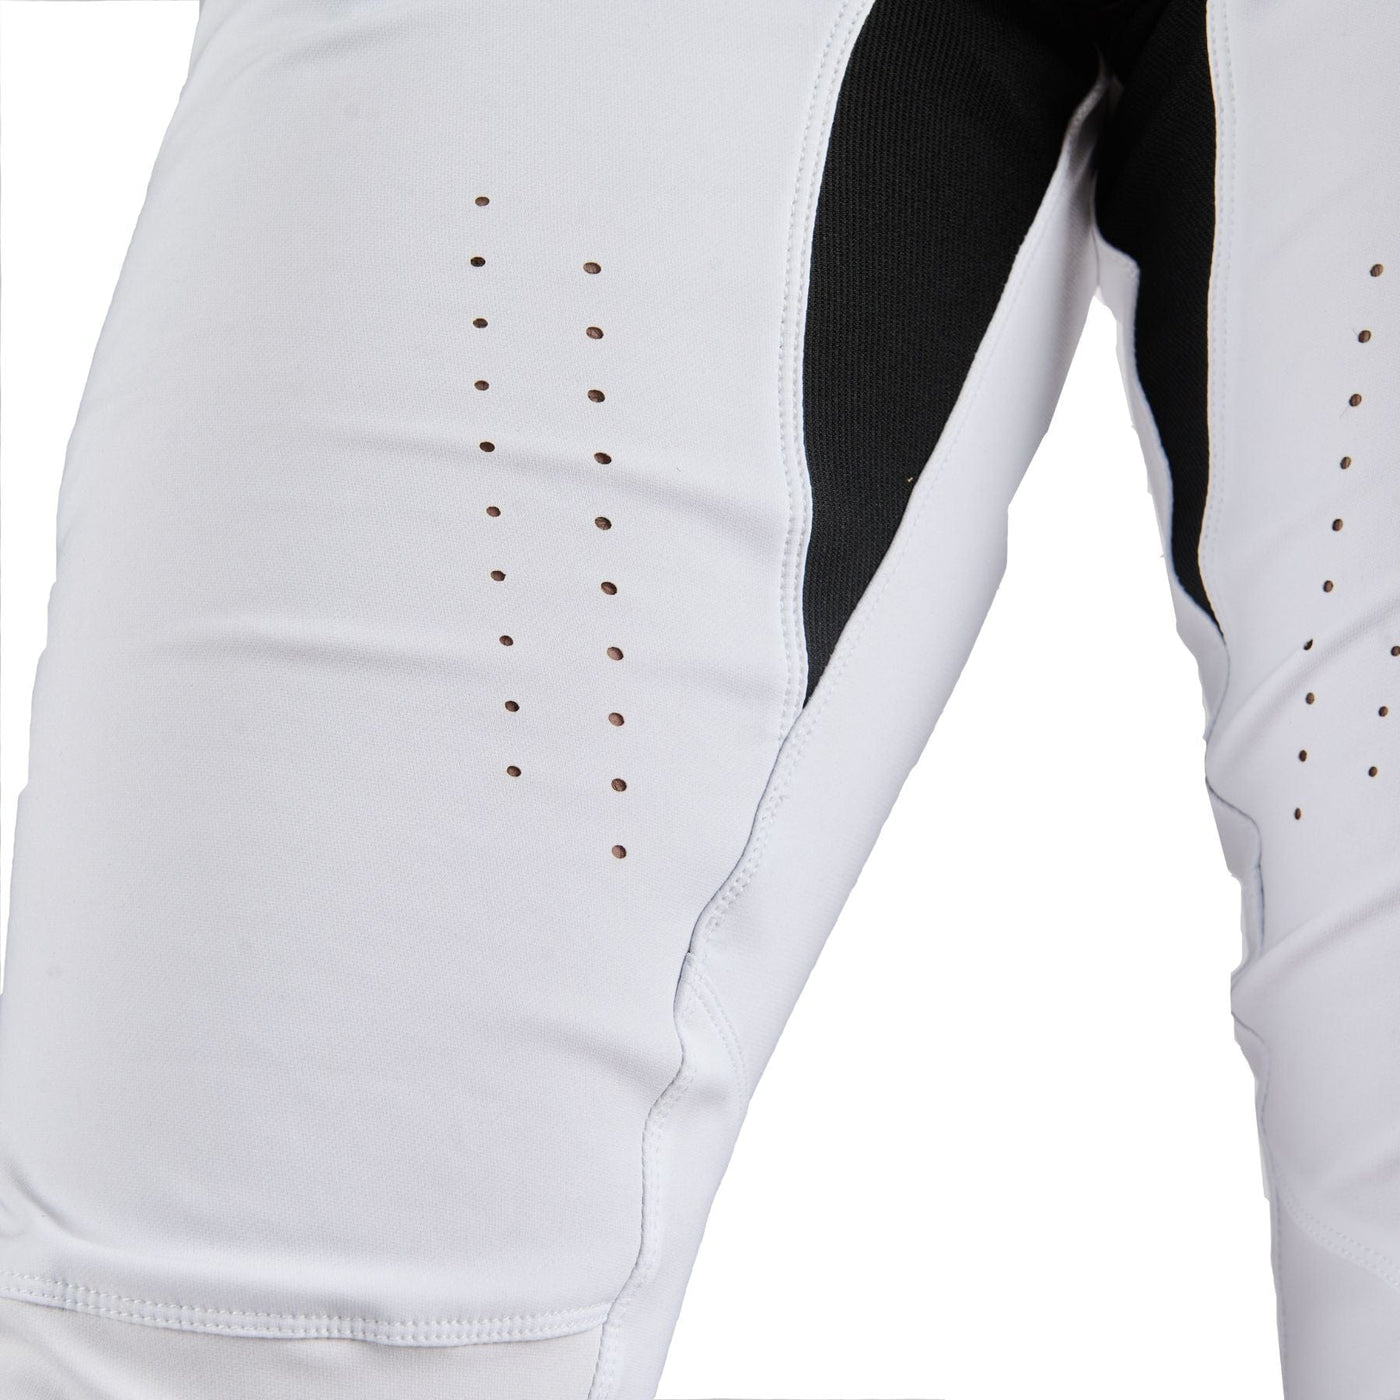 NoLogo Racer Youth BMX Pants - White 8Lines Shop - Fast Shipping